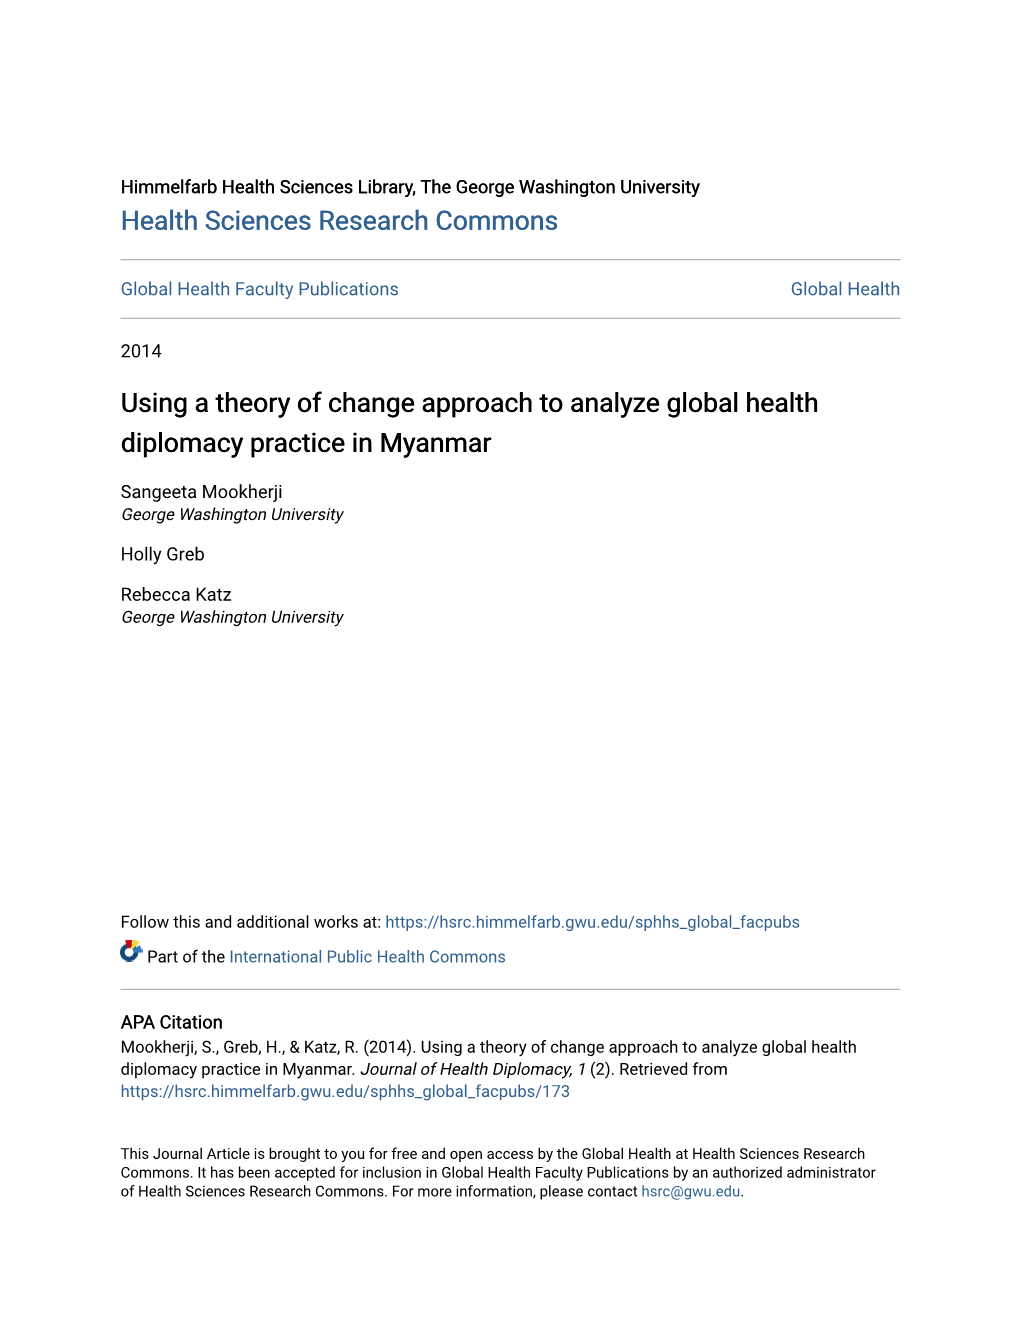 Using a Theory of Change Approach to Analyze Global Health Diplomacy Practice in Myanmar